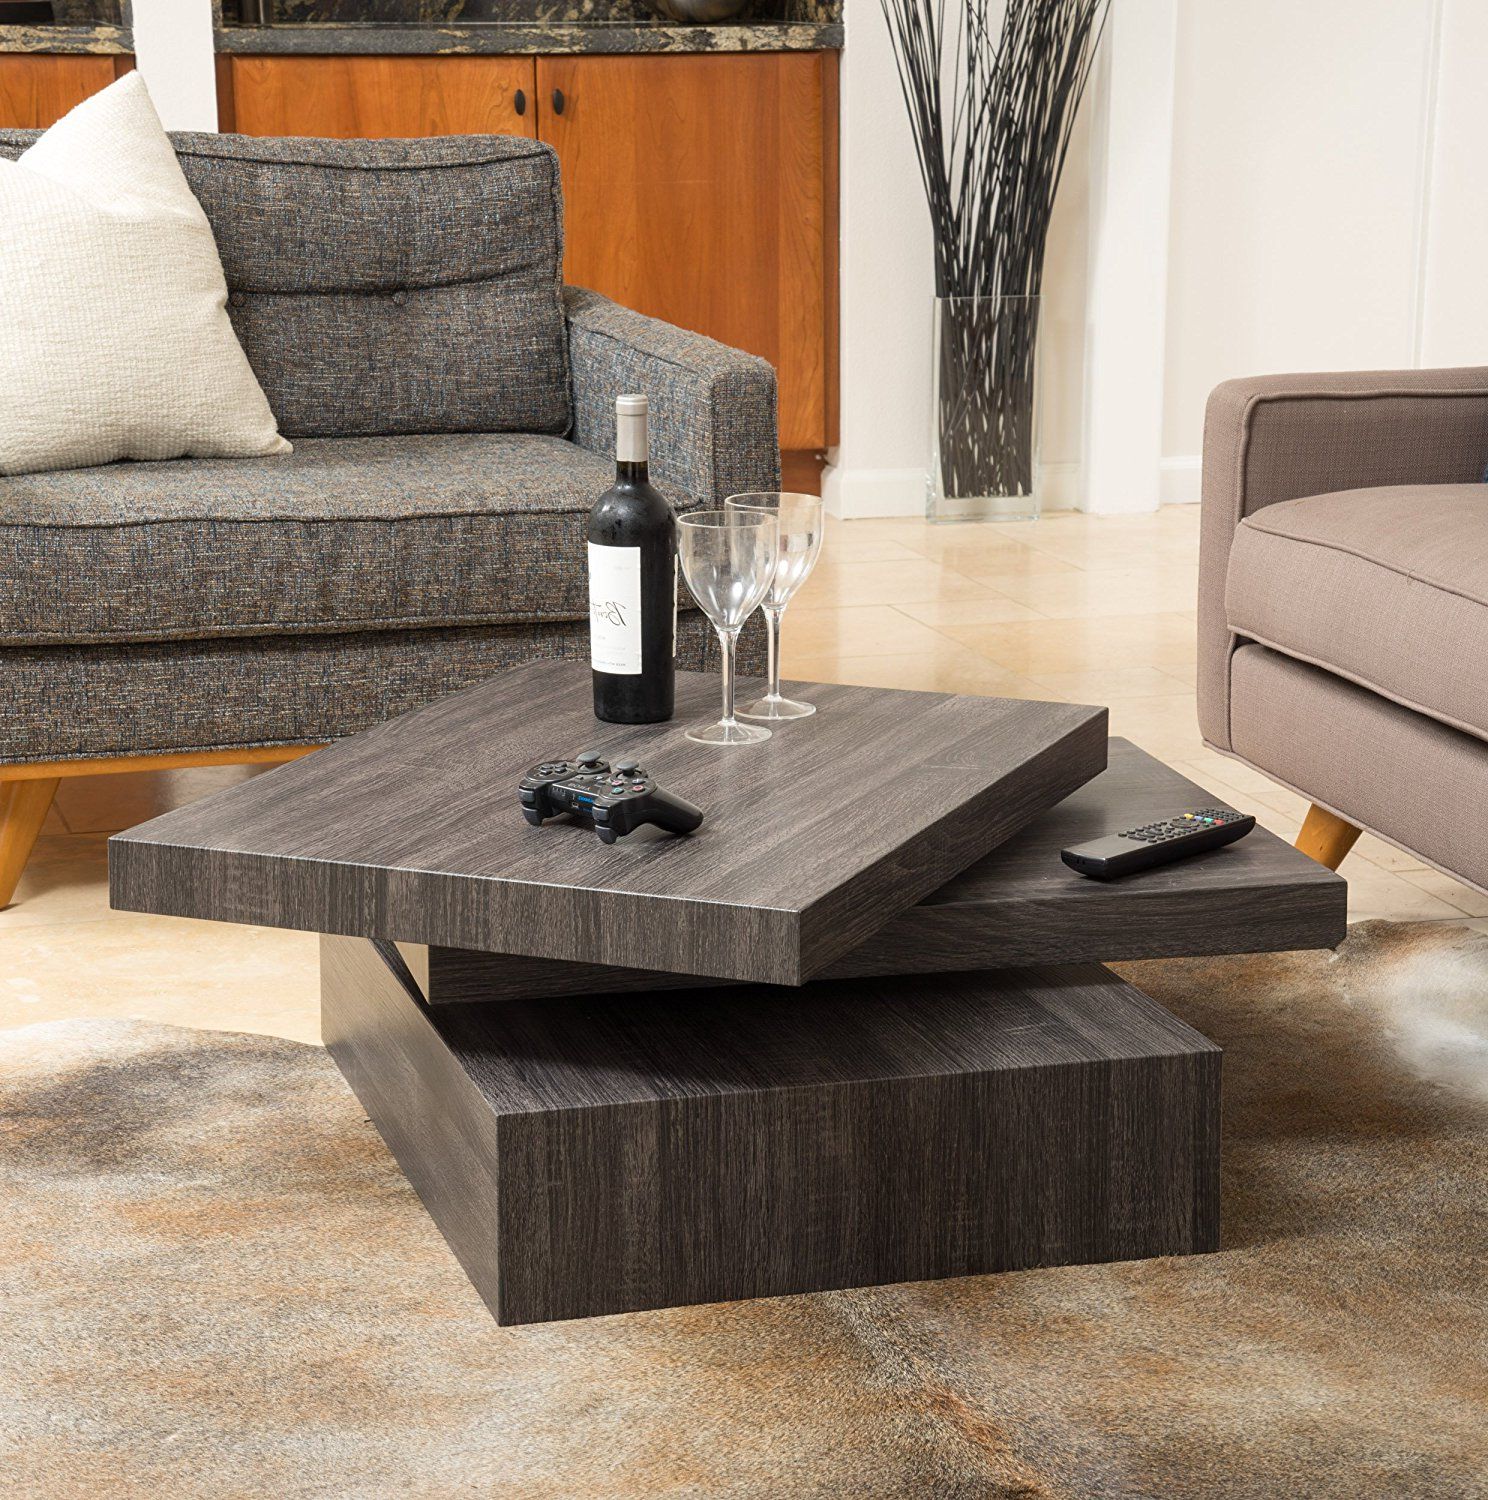 30 Thinks We Can Learn From This Living Room Coffee Table – Home Inside Simple Design Coffee Tables (View 13 of 15)